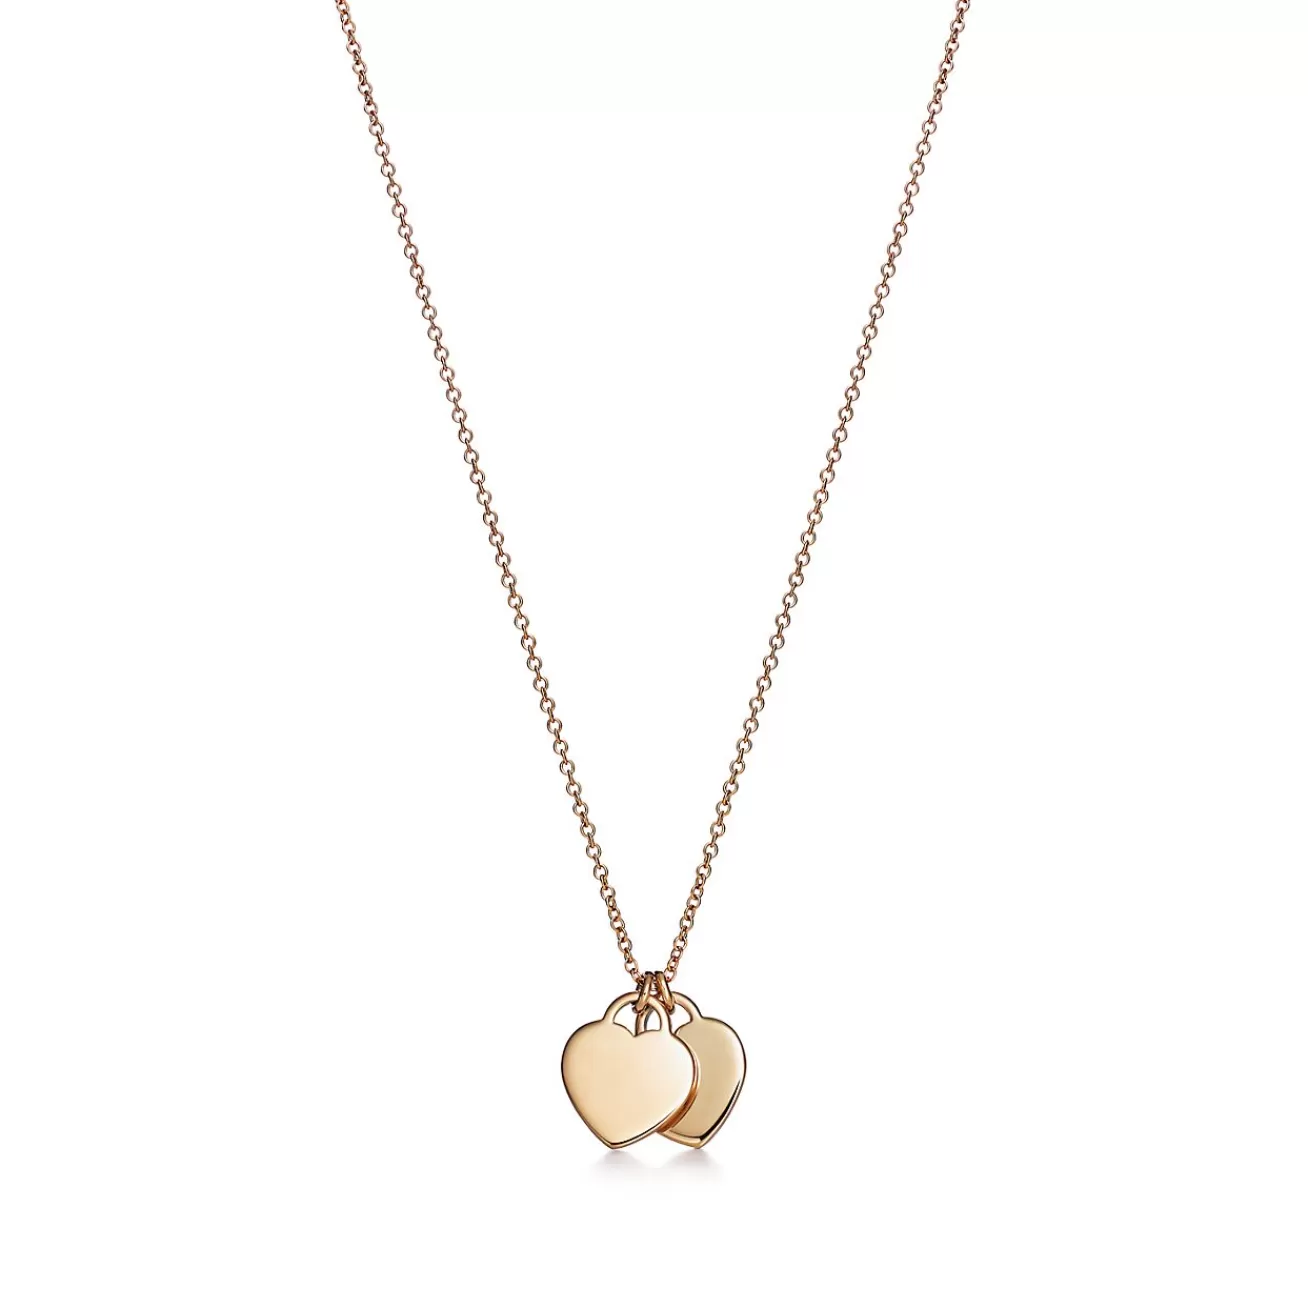 Tiffany & Co. Return to Tiffany® Double Heart Tag Pendant in Yellow Gold, Mini | ^ Necklaces & Pendants | Gifts for Her